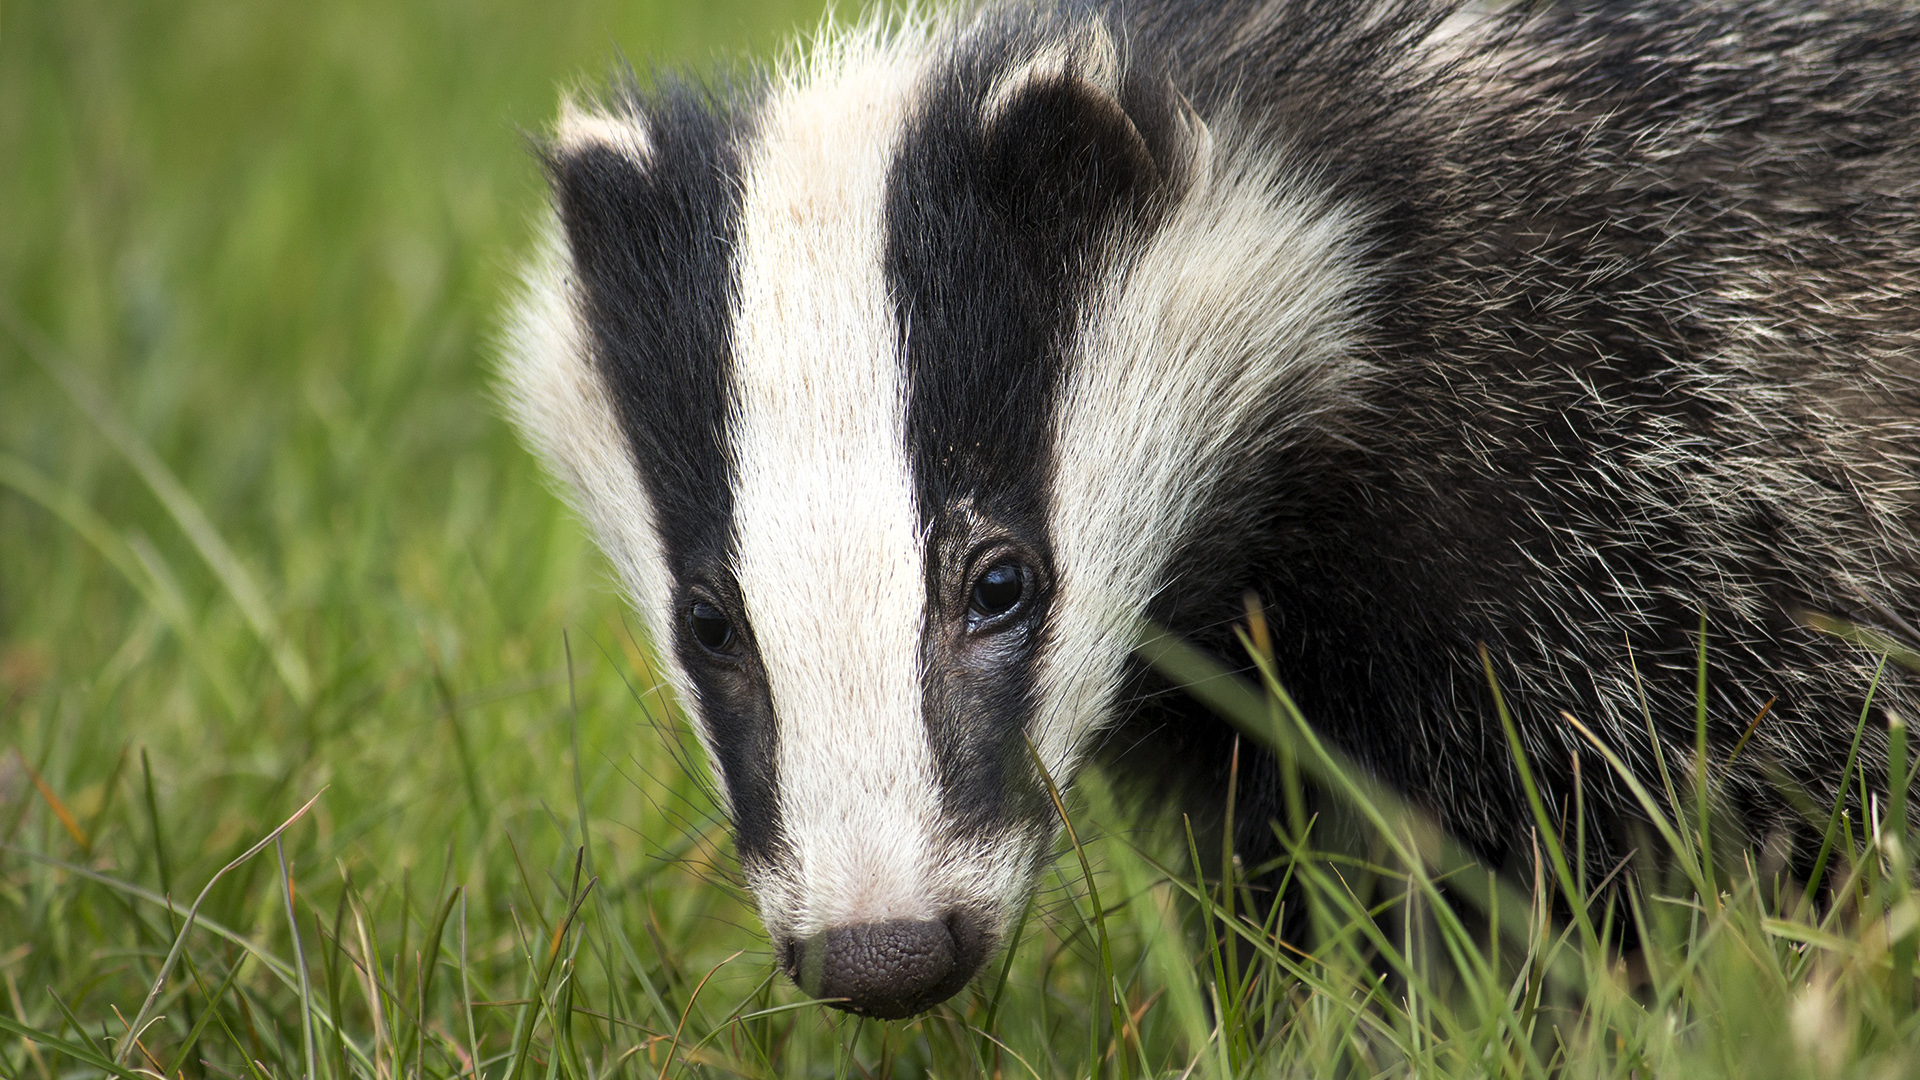 Badger facts and information | Trees for Life